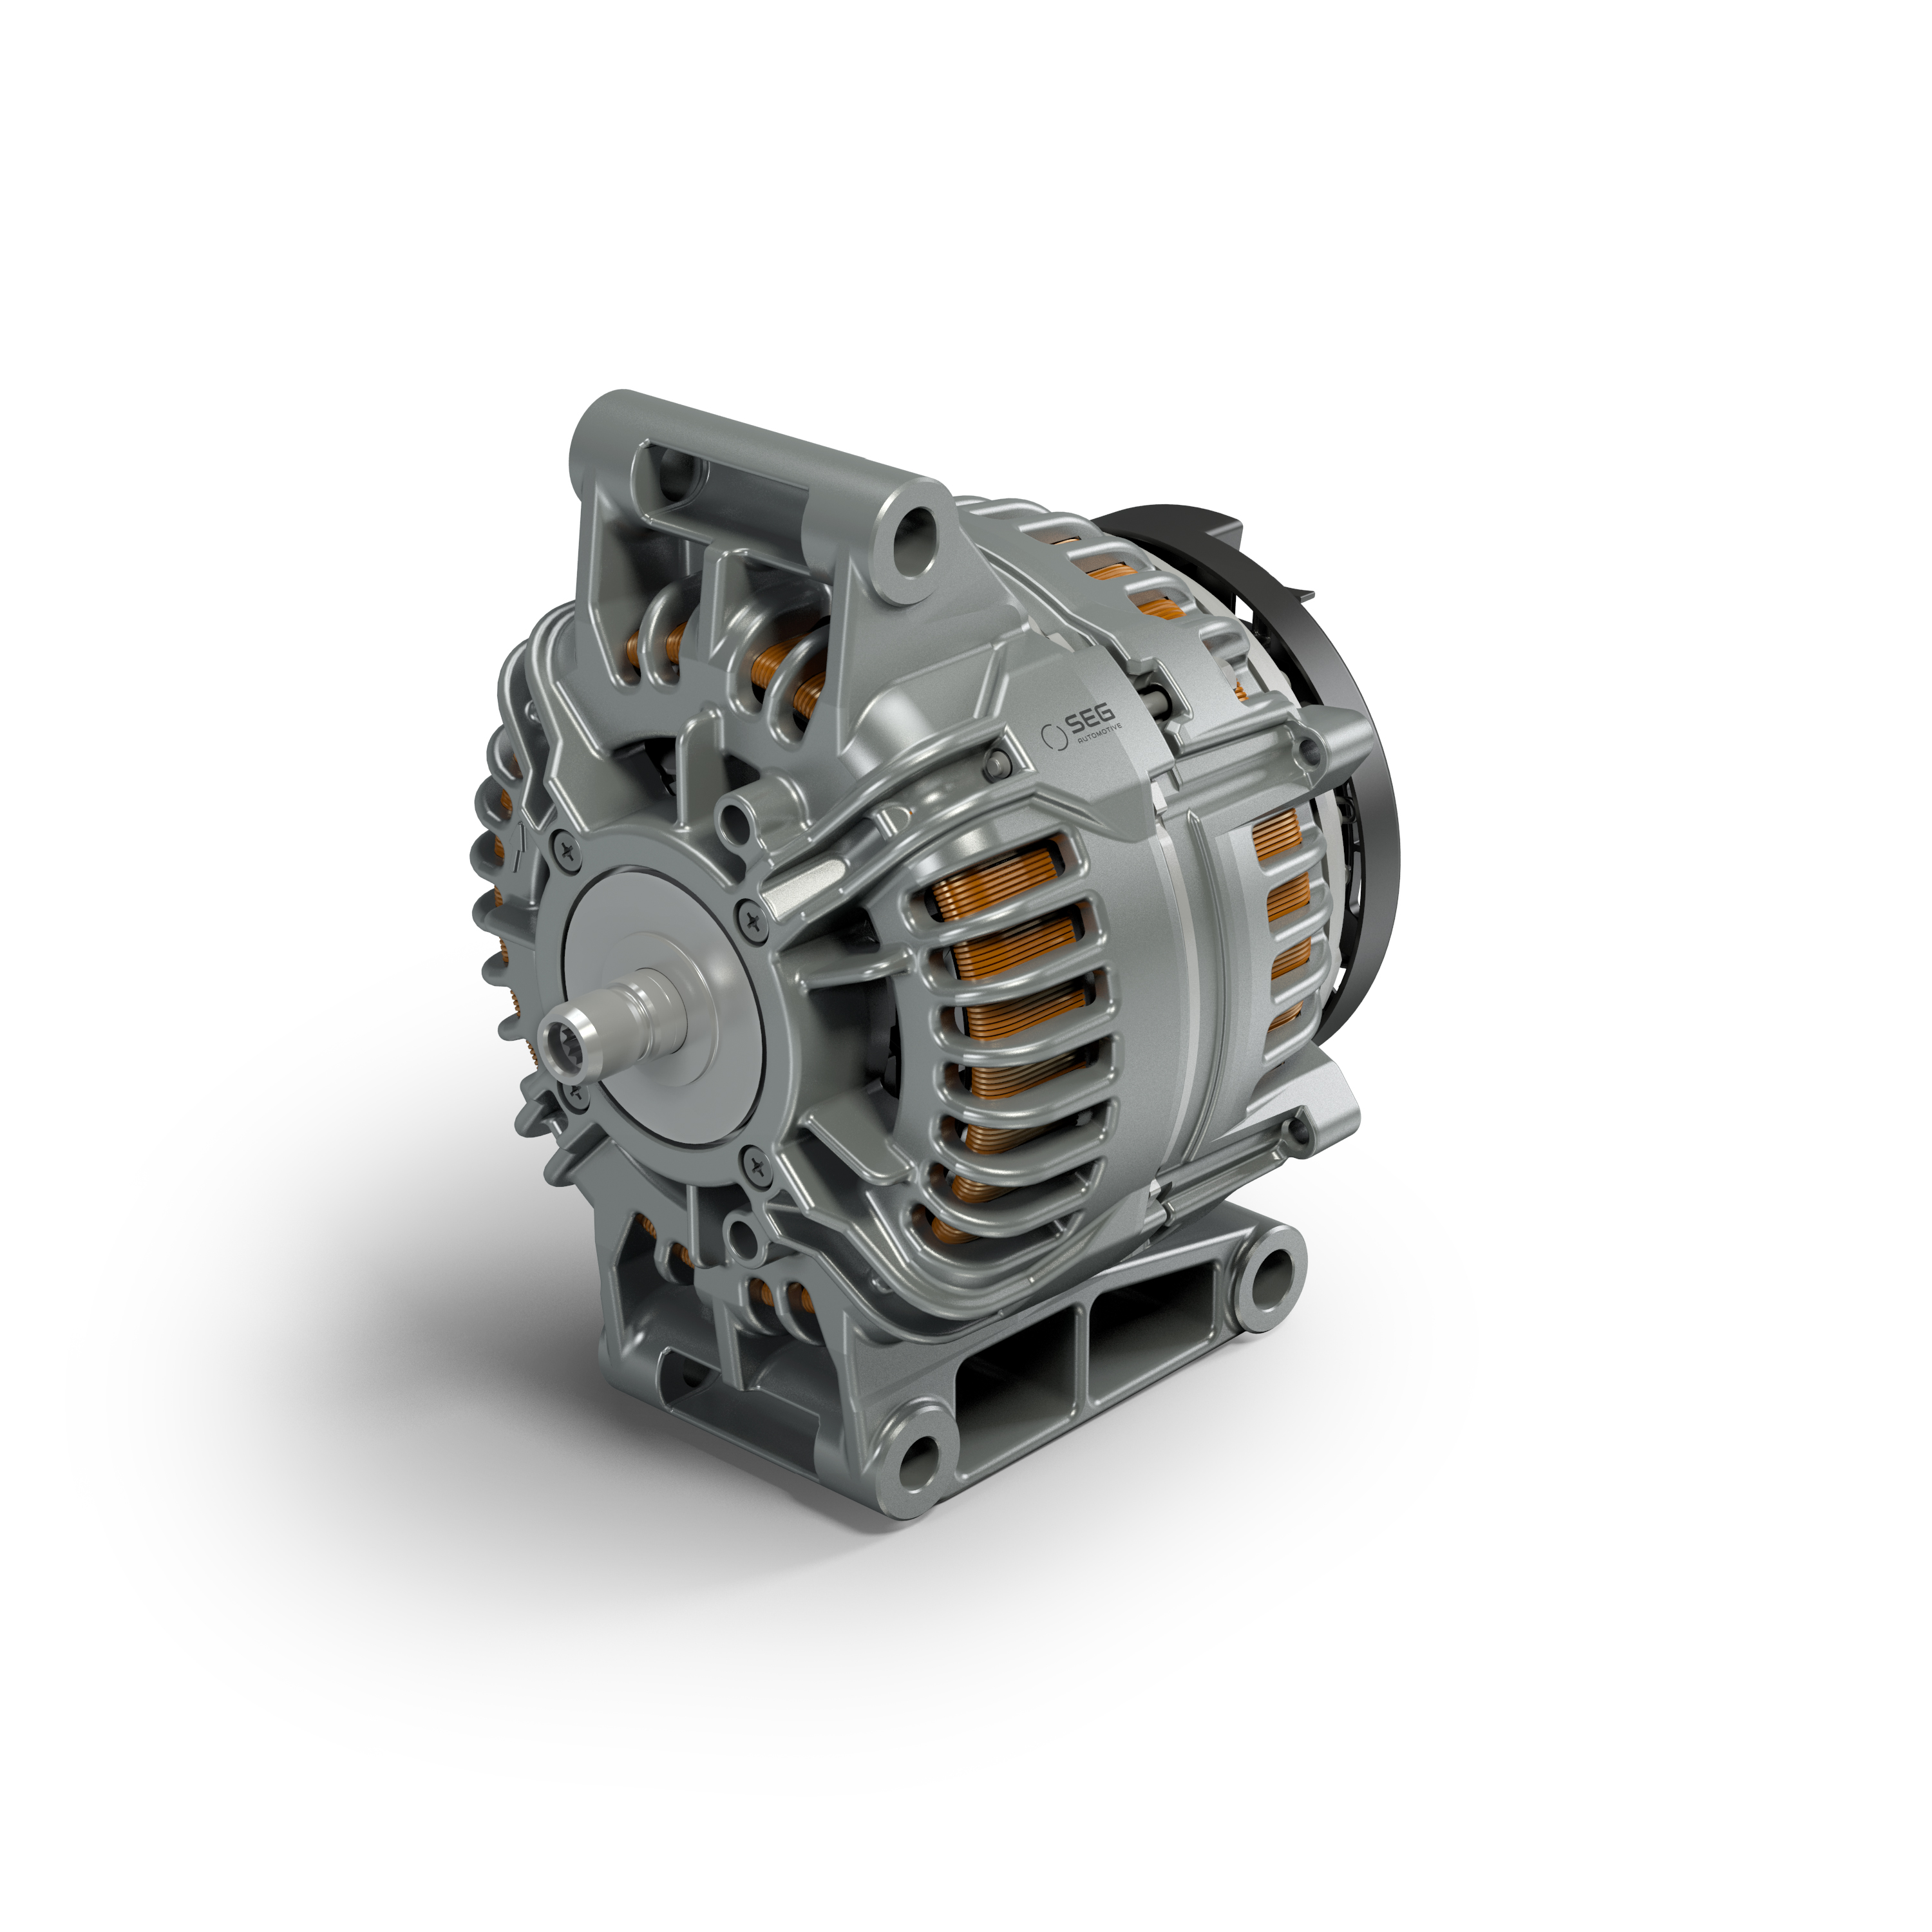 Knorr-Bremse TruckServices to sell starter motors and generators